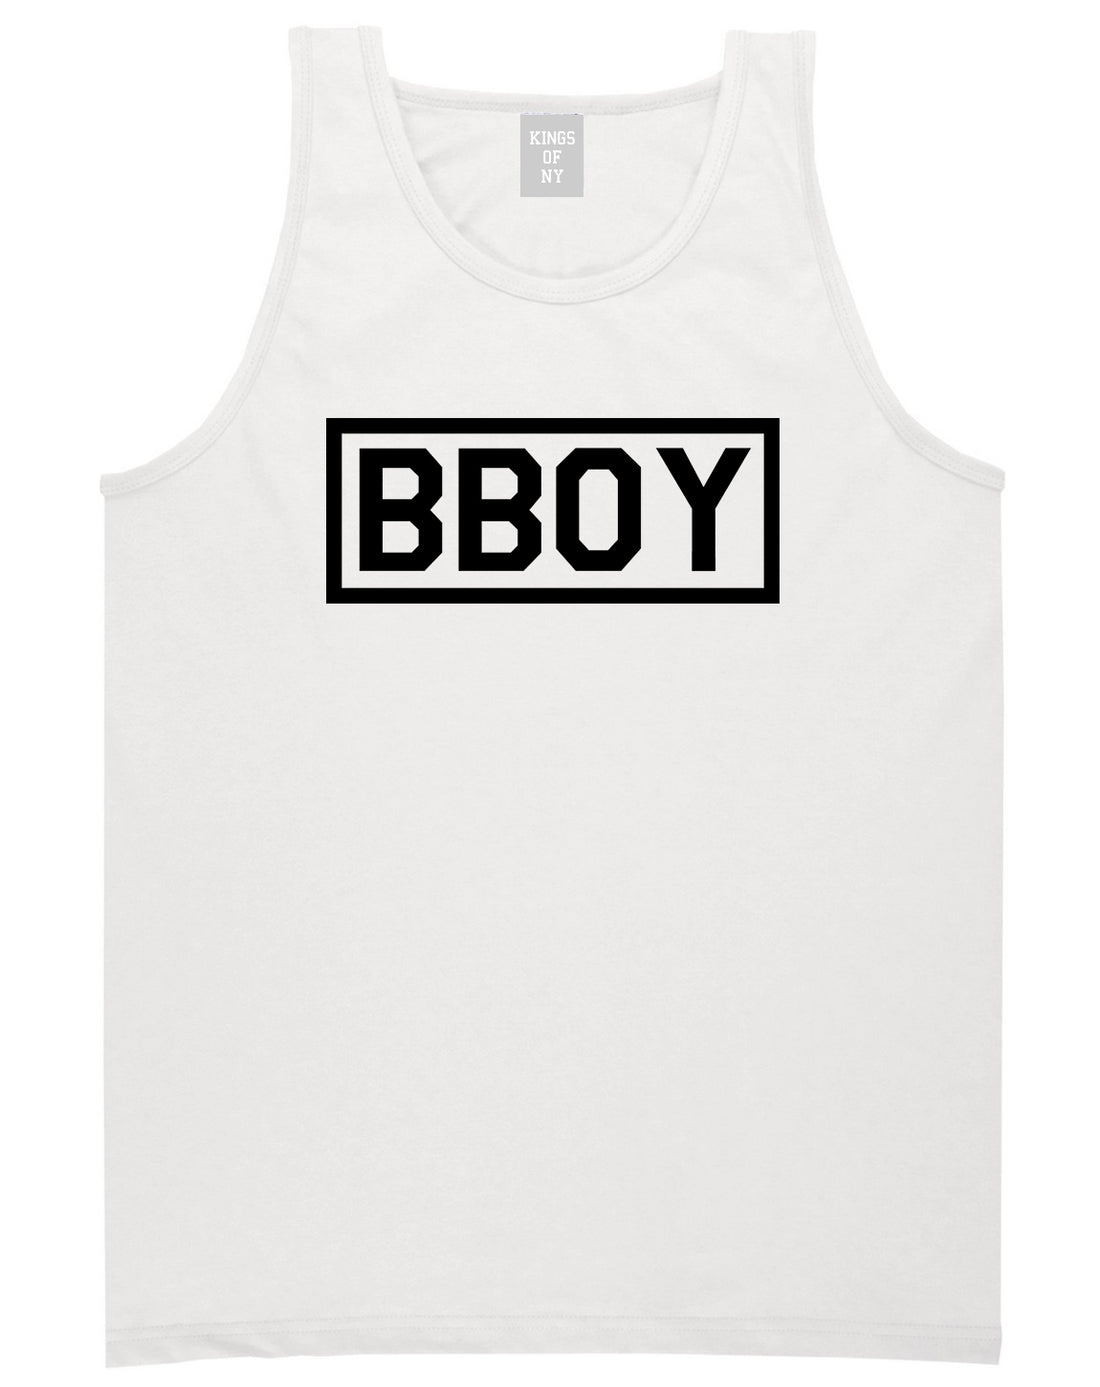 Bboy Breakdancing White Tank Top Shirt by Kings Of NY